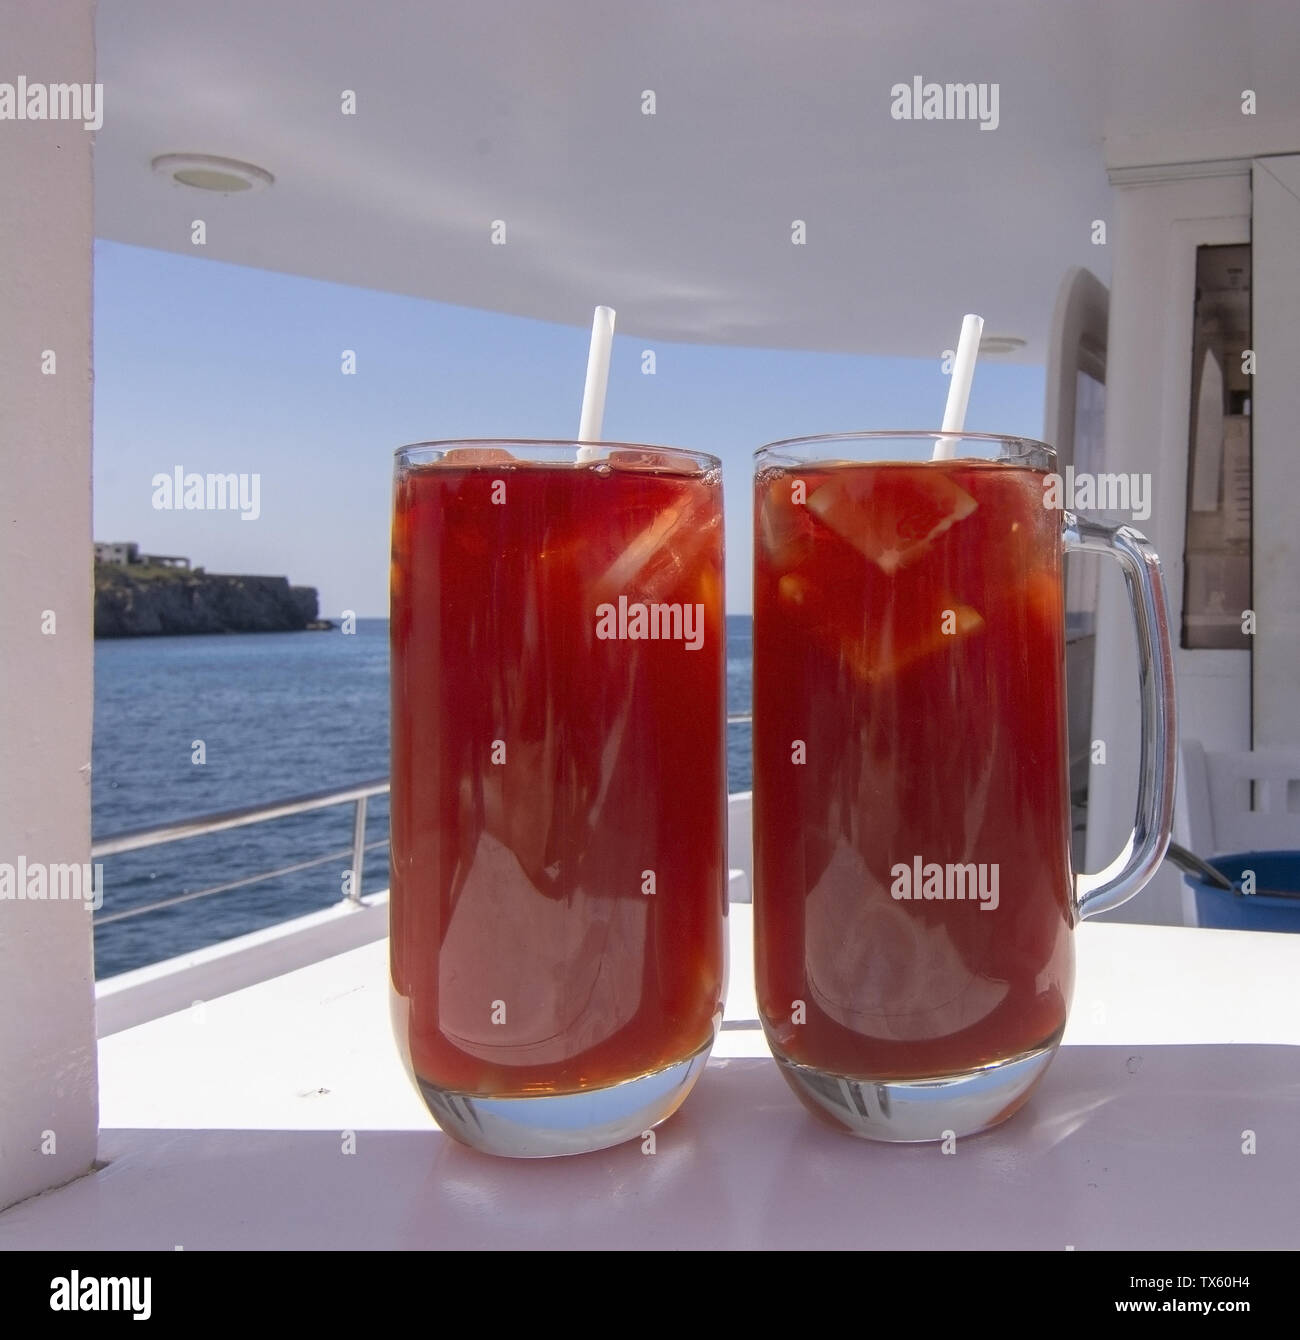 MALLORCA, SPAIN - JUNE 23, 2019: Sangria bar on tourboat Tropical with Cruceros Cormoran on a sunny day at sea on June 23, 2019 in Mallorca, Spain. Stock Photo